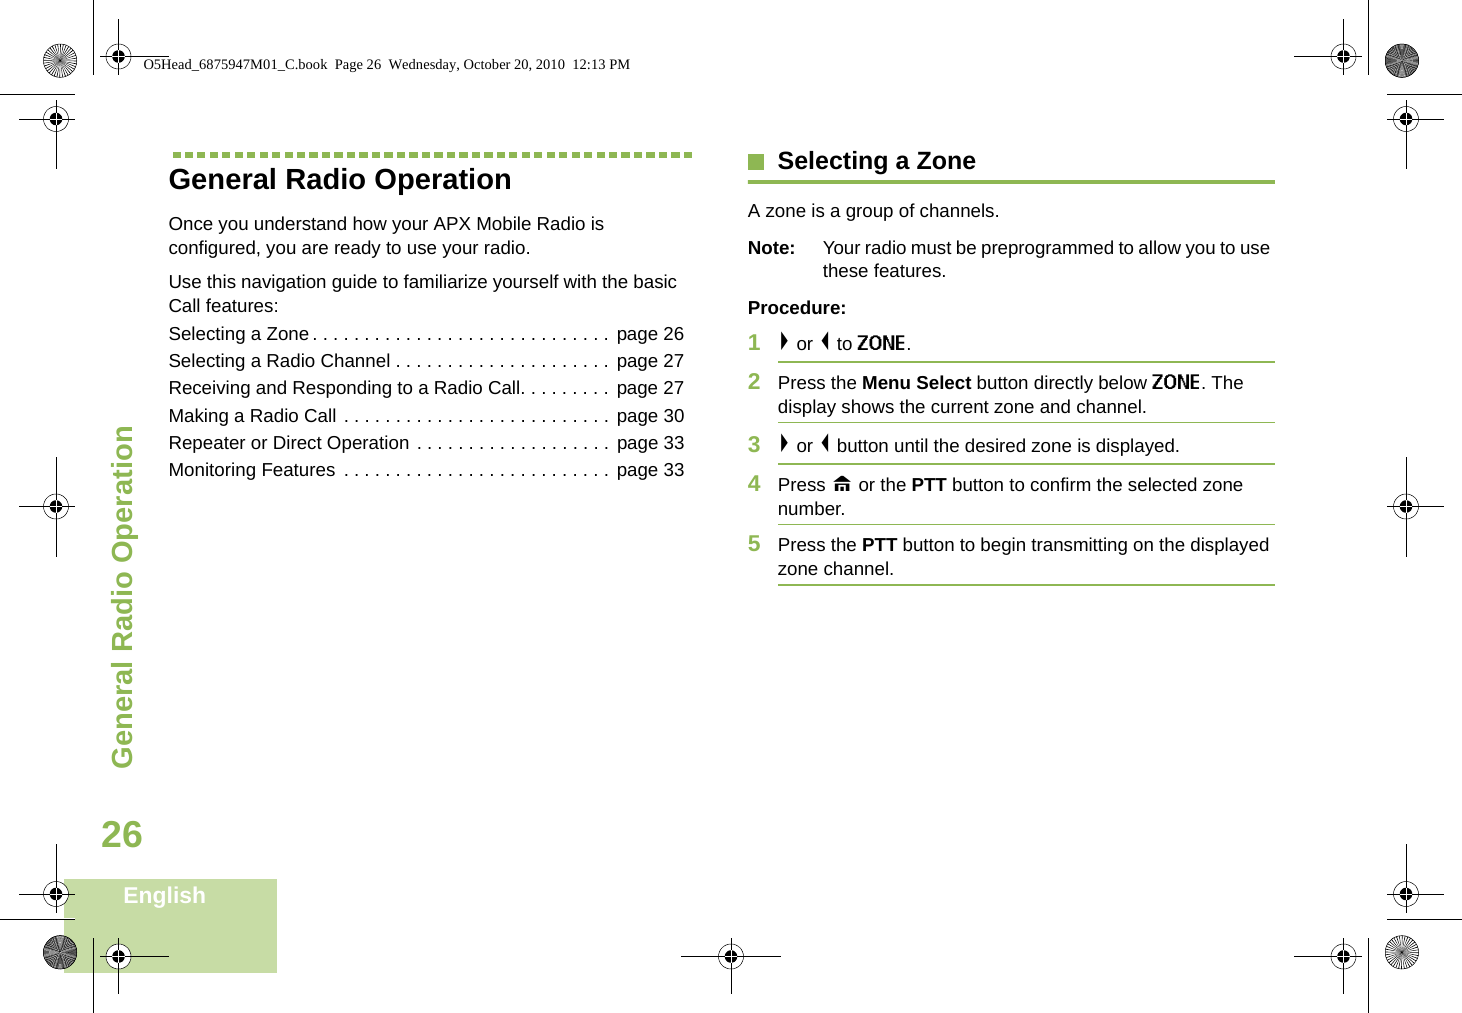 General Radio OperationEnglish26General Radio OperationOnce you understand how your APX Mobile Radio is configured, you are ready to use your radio.Use this navigation guide to familiarize yourself with the basic Call features:Selecting a Zone. . . . . . . . . . . . . . . . . . . . . . . . . . . . .  page 26Selecting a Radio Channel . . . . . . . . . . . . . . . . . . . . . page 27Receiving and Responding to a Radio Call. . . . . . . . . page 27Making a Radio Call . . . . . . . . . . . . . . . . . . . . . . . . . .  page 30Repeater or Direct Operation . . . . . . . . . . . . . . . . . . . page 33Monitoring Features . . . . . . . . . . . . . . . . . . . . . . . . . . page 33Selecting a ZoneA zone is a group of channels.Note: Your radio must be preprogrammed to allow you to use these features.Procedure:1&gt; or &lt; to ZONE.2Press the Menu Select button directly below ZONE. The display shows the current zone and channel.3&gt; or &lt; button until the desired zone is displayed.4Press H or the PTT button to confirm the selected zone number. 5Press the PTT button to begin transmitting on the displayed zone channel.O5Head_6875947M01_C.book  Page 26  Wednesday, October 20, 2010  12:13 PM